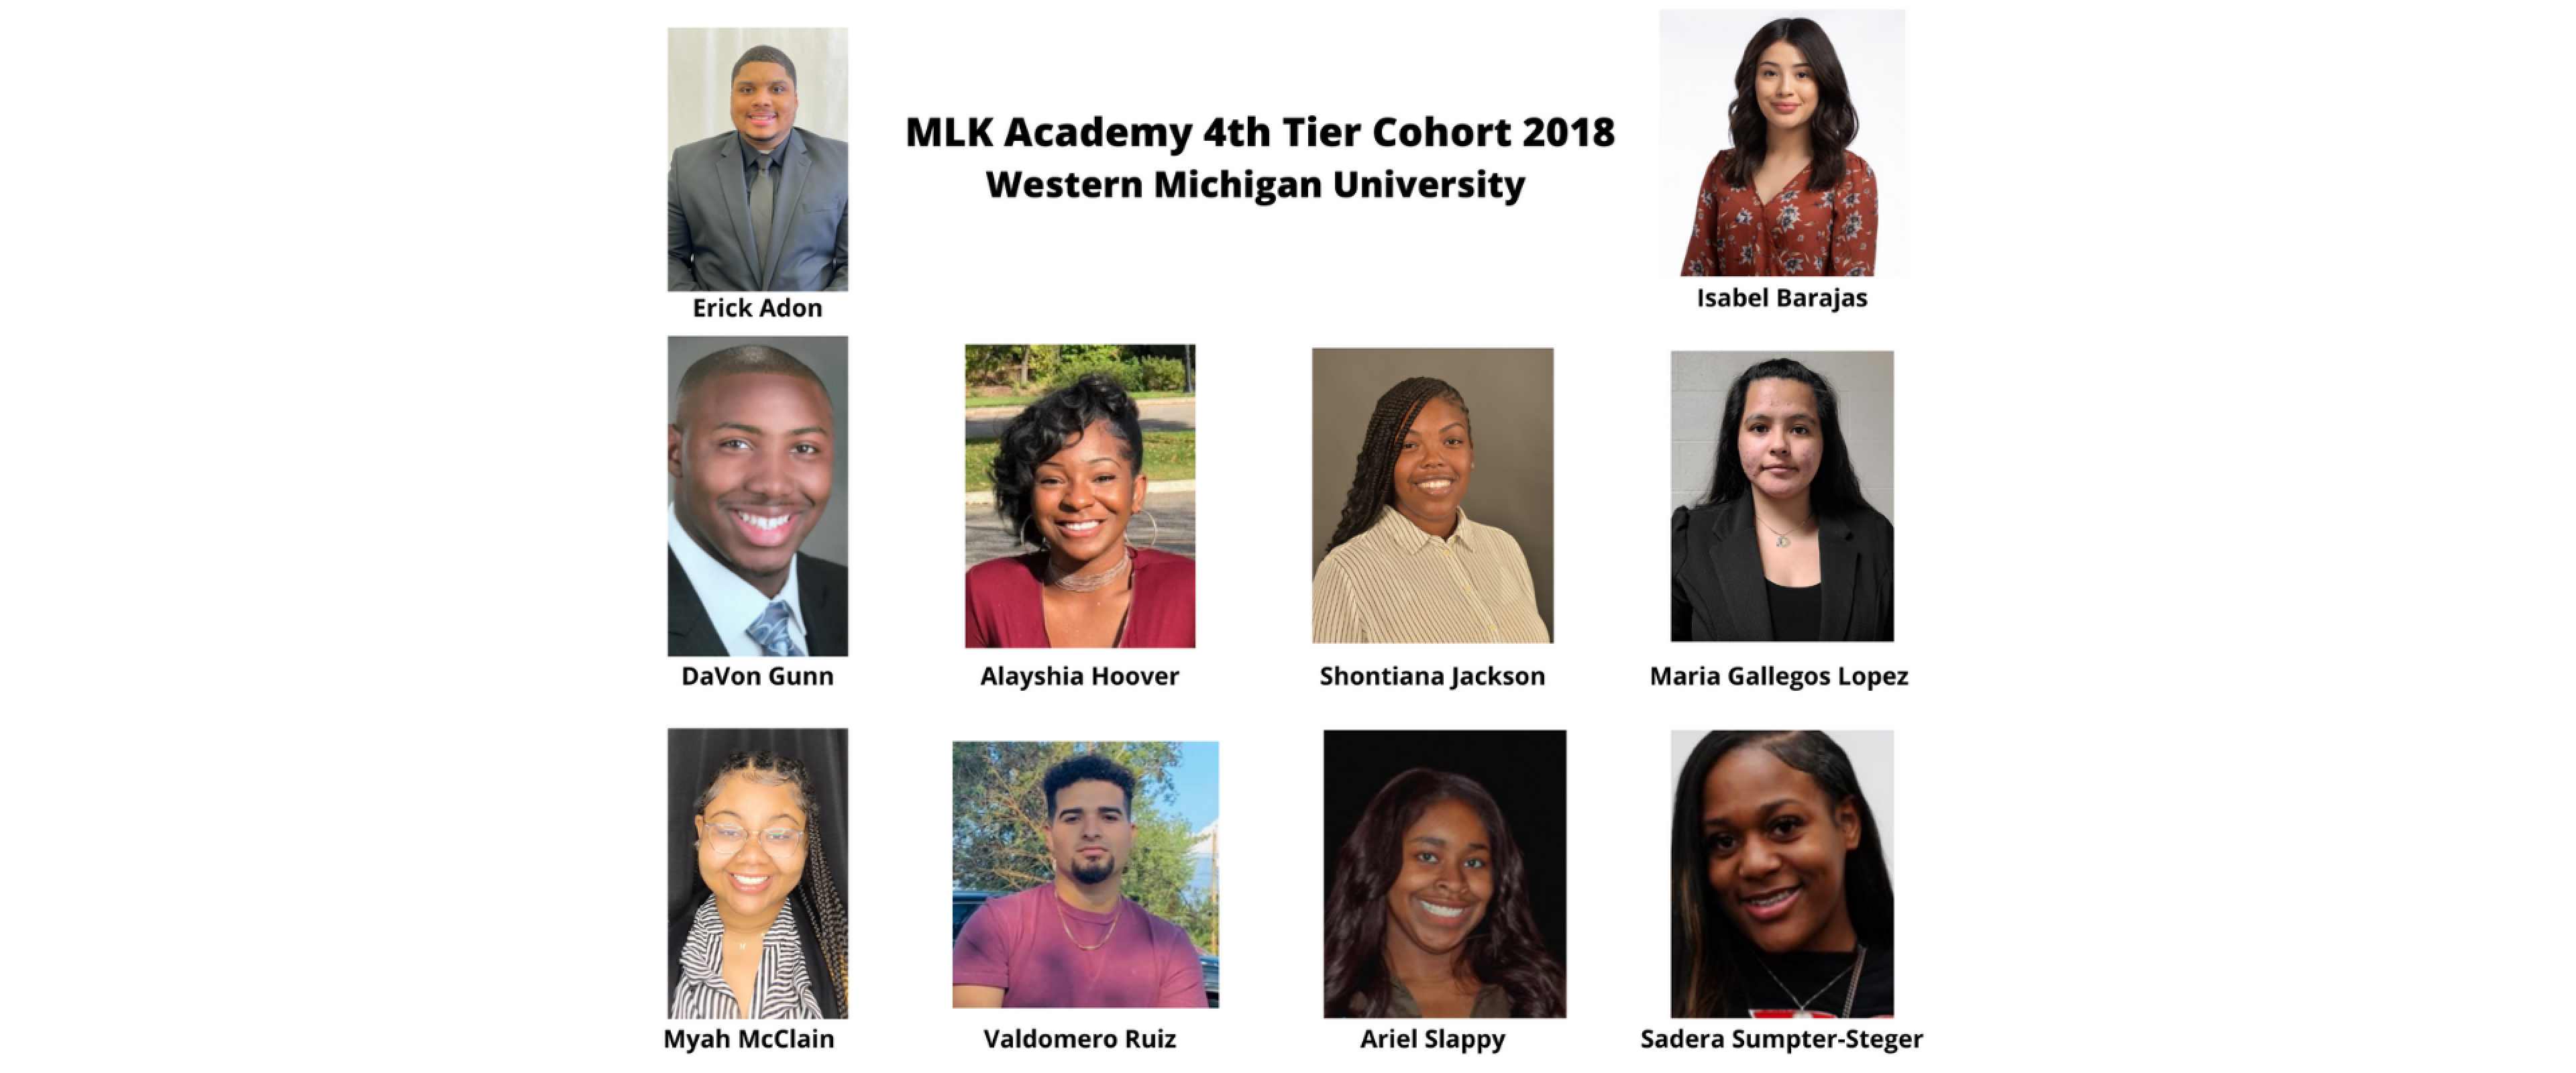 A collage of 10 students who are fourth tier MLK scholars in the 2018 cohort.